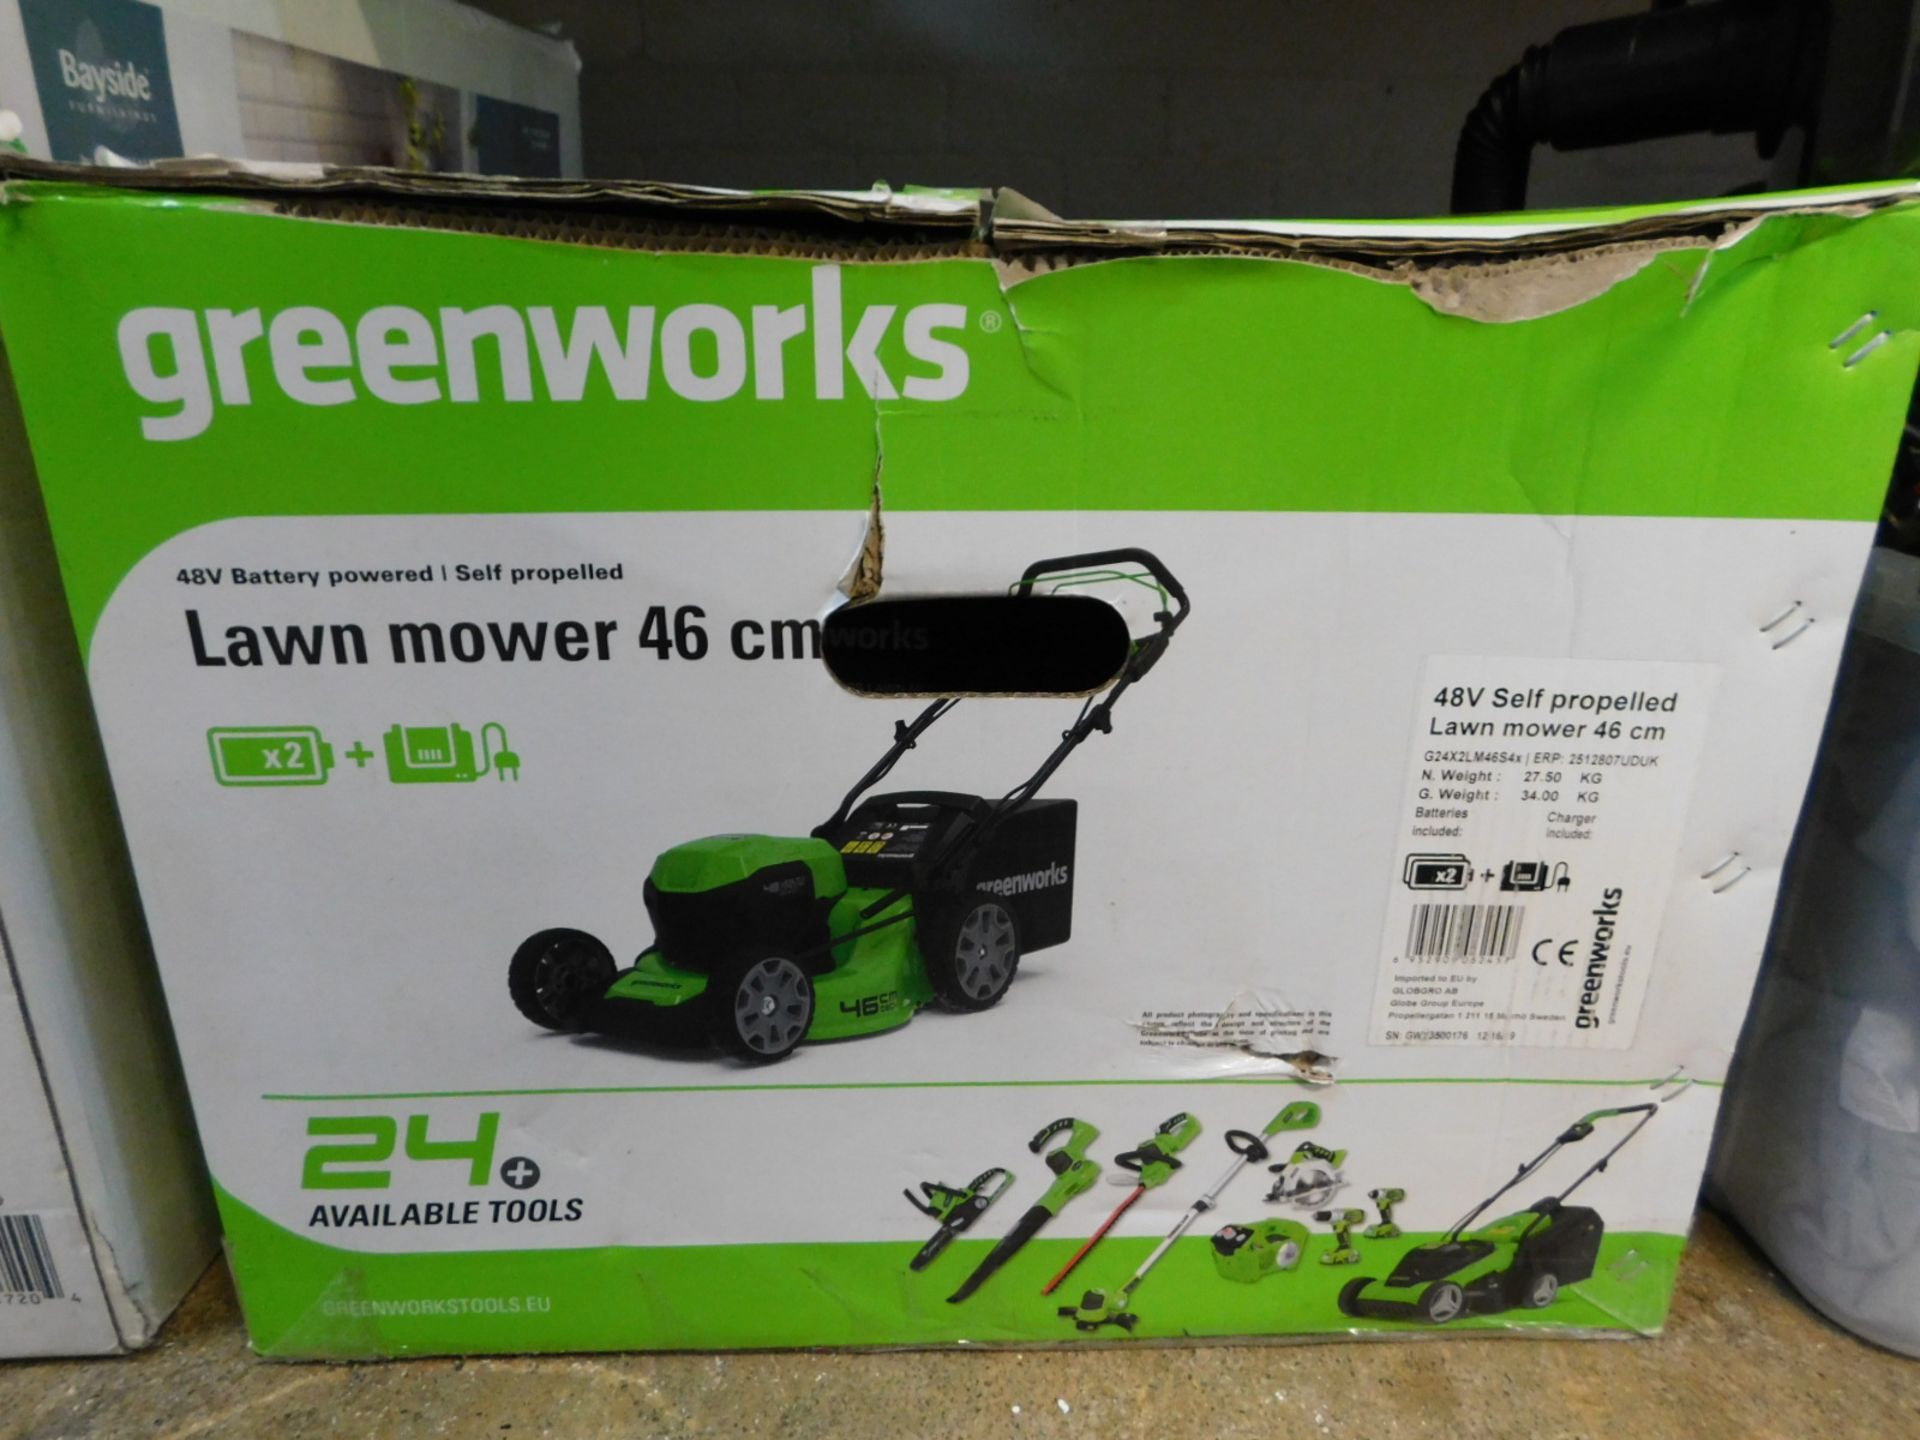 1 BOXED GREENWORKS 48V CORDLESS 46CM SELF PROPELLED LAWN MOWER WITH 2 BATTERIES AND CHARGER RRP Â£